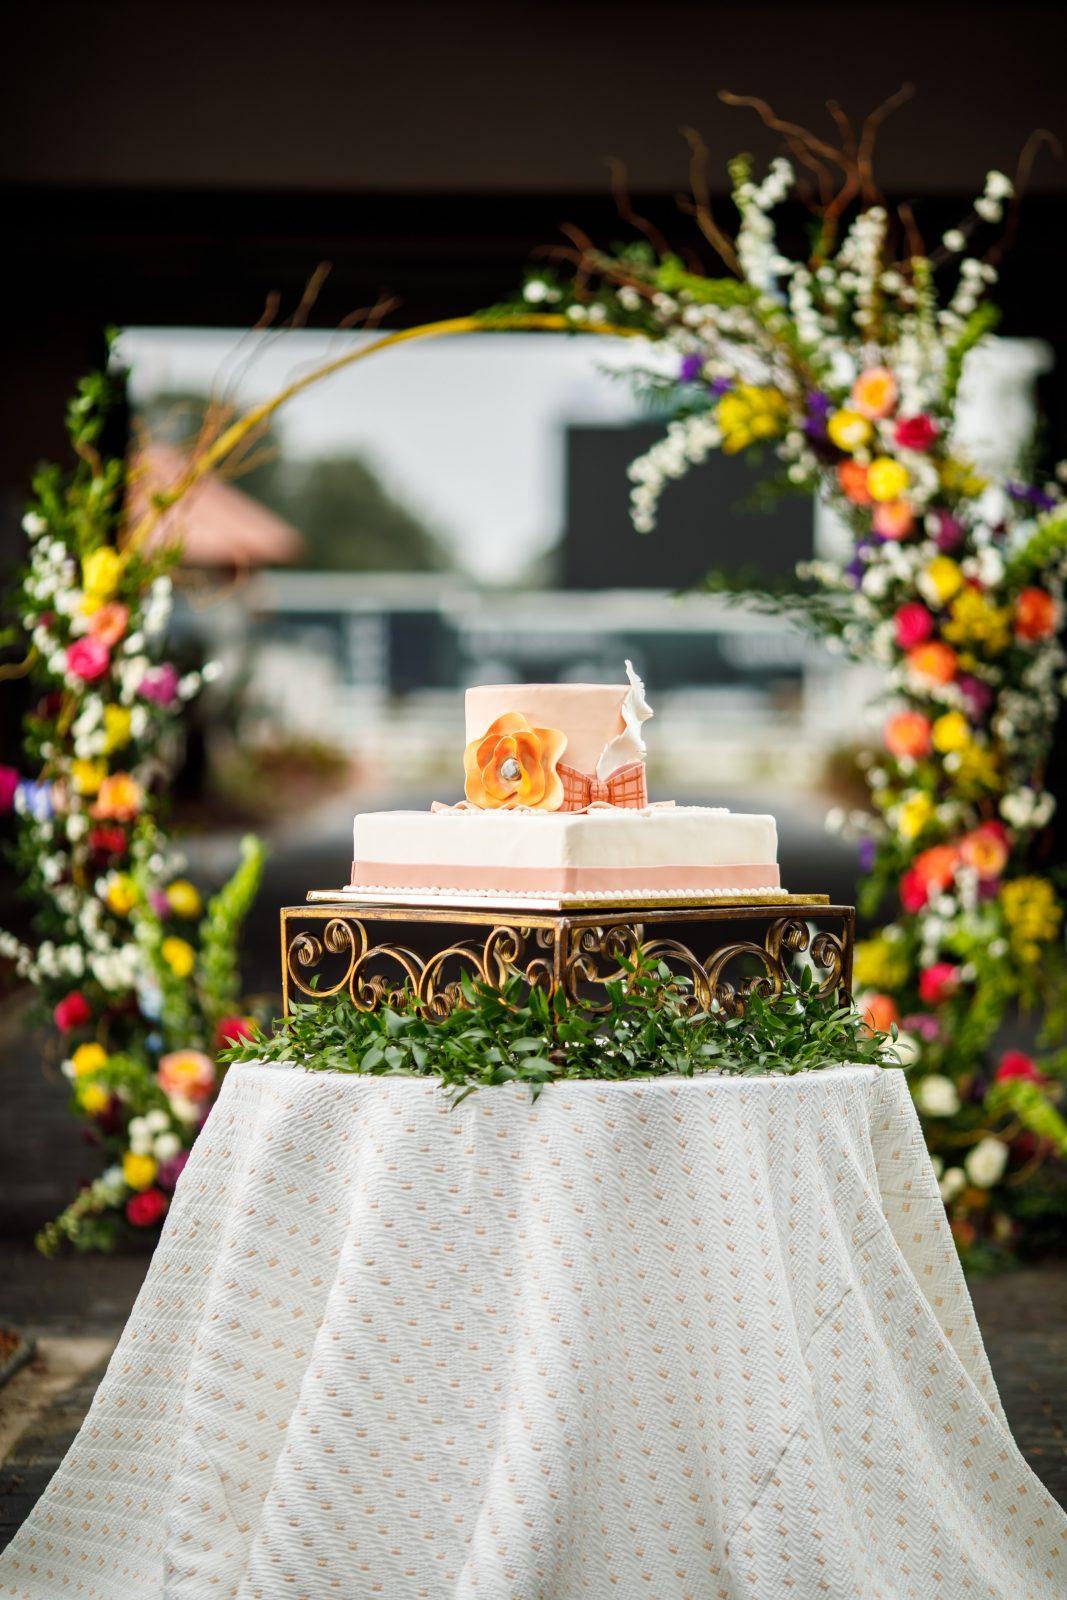 Gambino's Bakery Day at the Races cake. Photo: North Photography